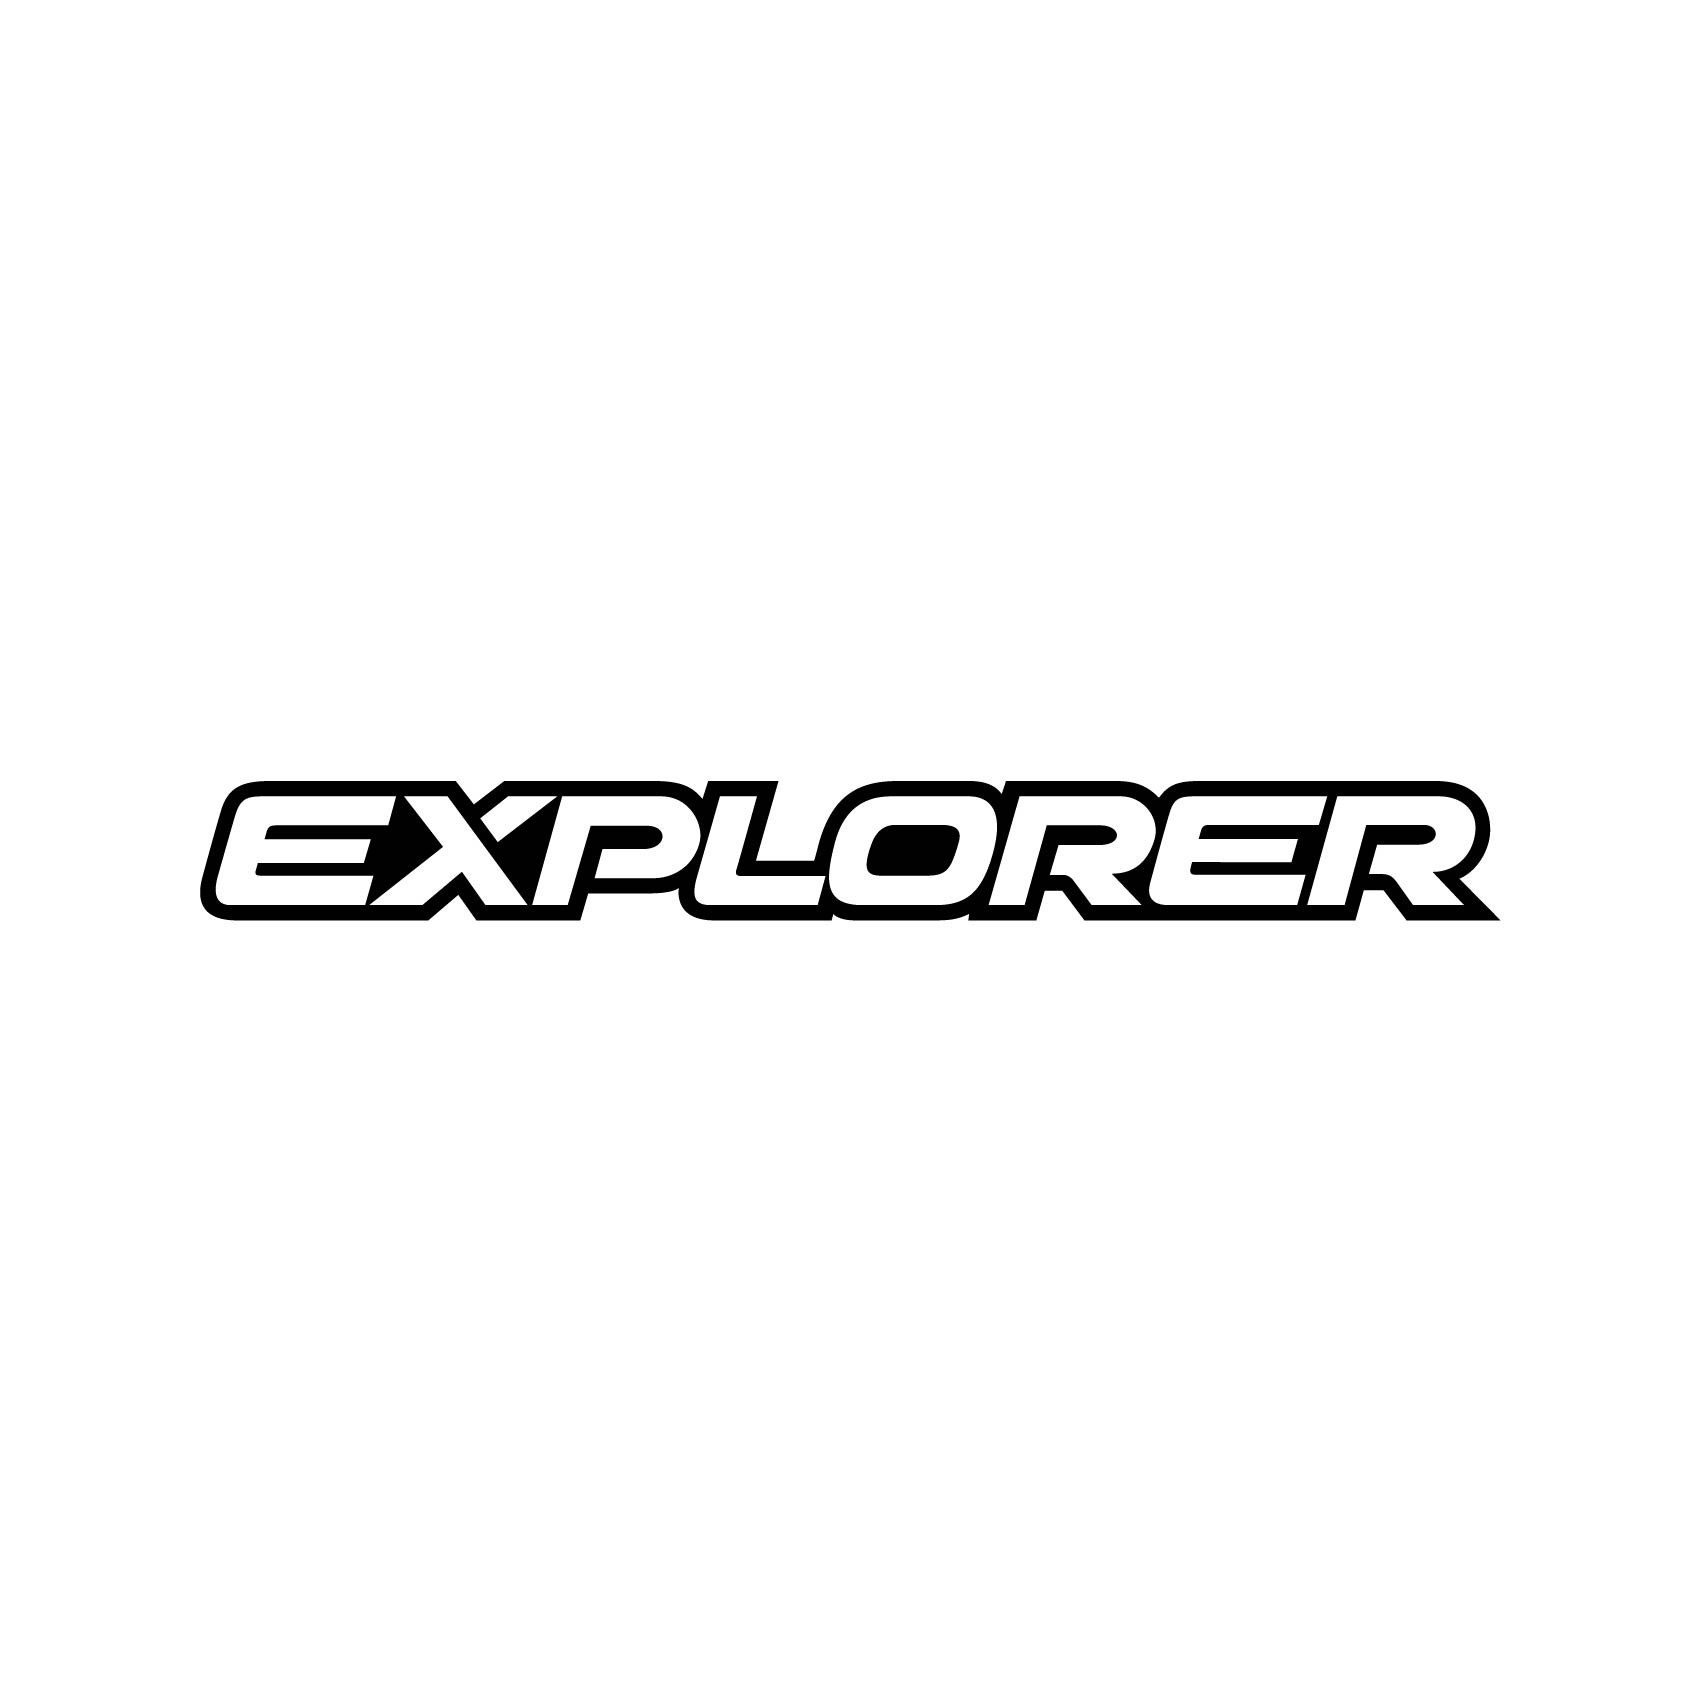 stickers-ford-explorer-logo-ref10ford4x4-autocollant-ford-4x4-sticker-pour-tout-terrain-off-road